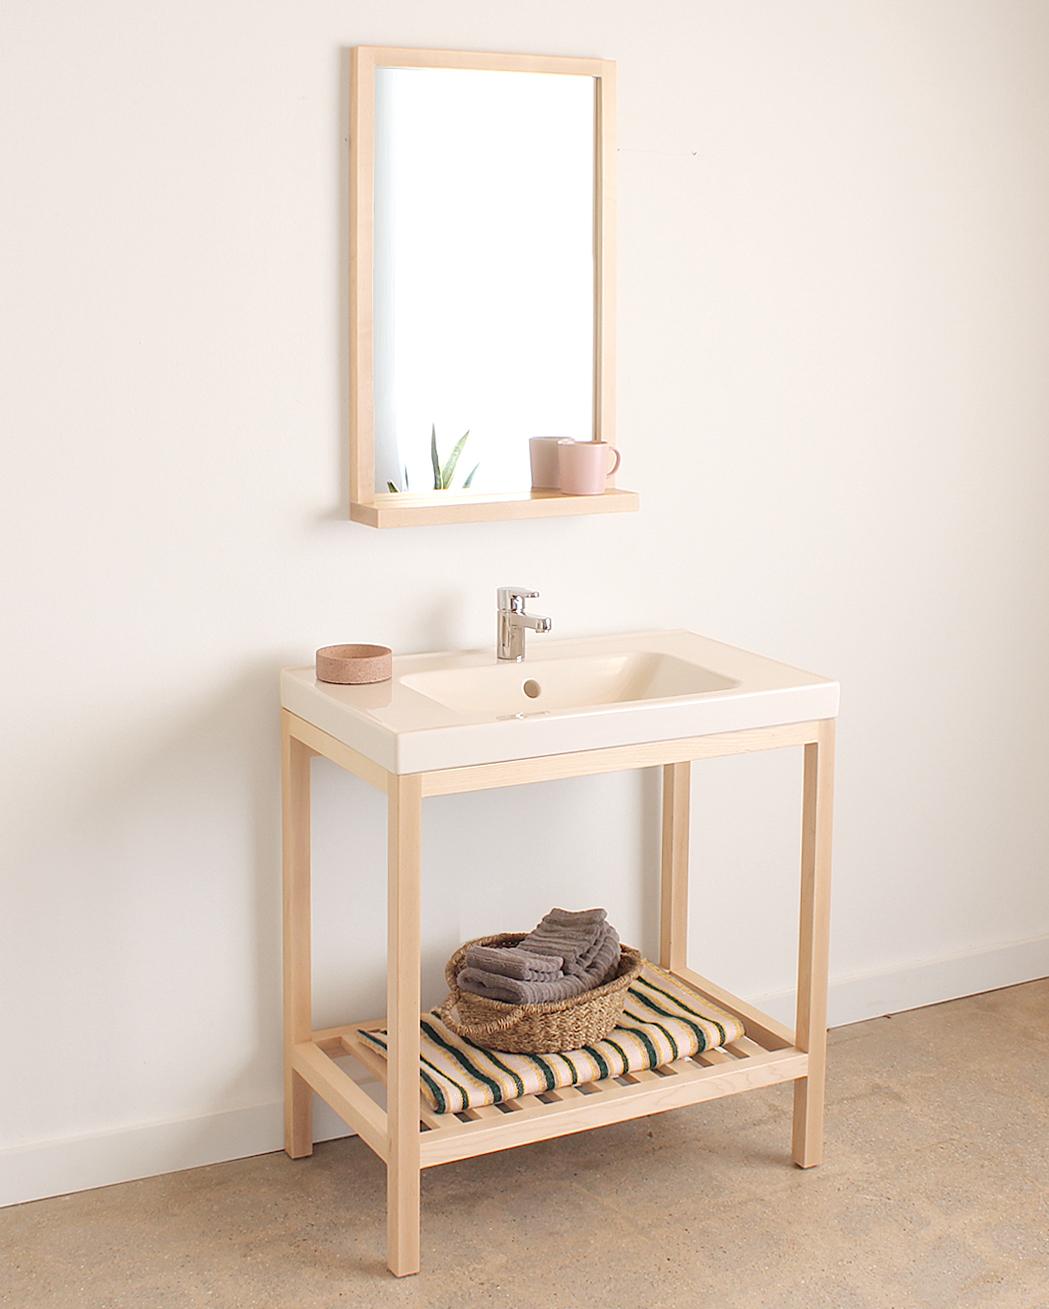 American Sink Stand in Maple and Odensvik Sink Included by Elliott Marks